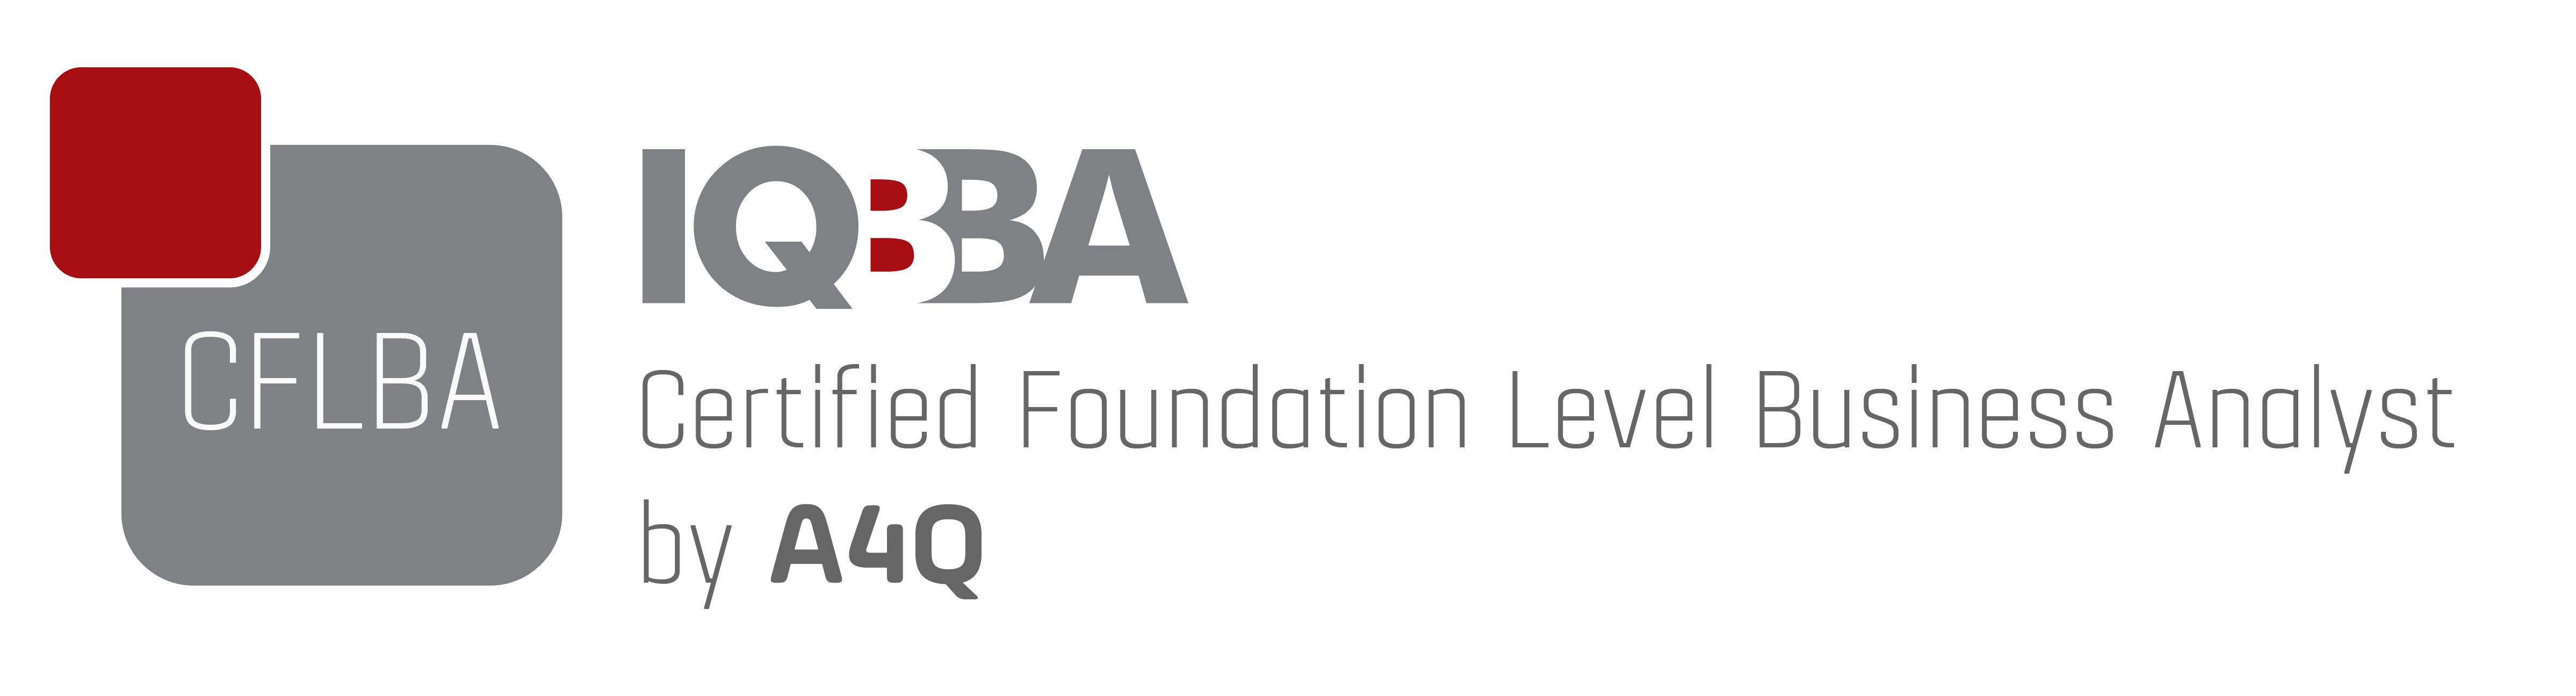 IQBBA Certified Foundation Level Business Analyst